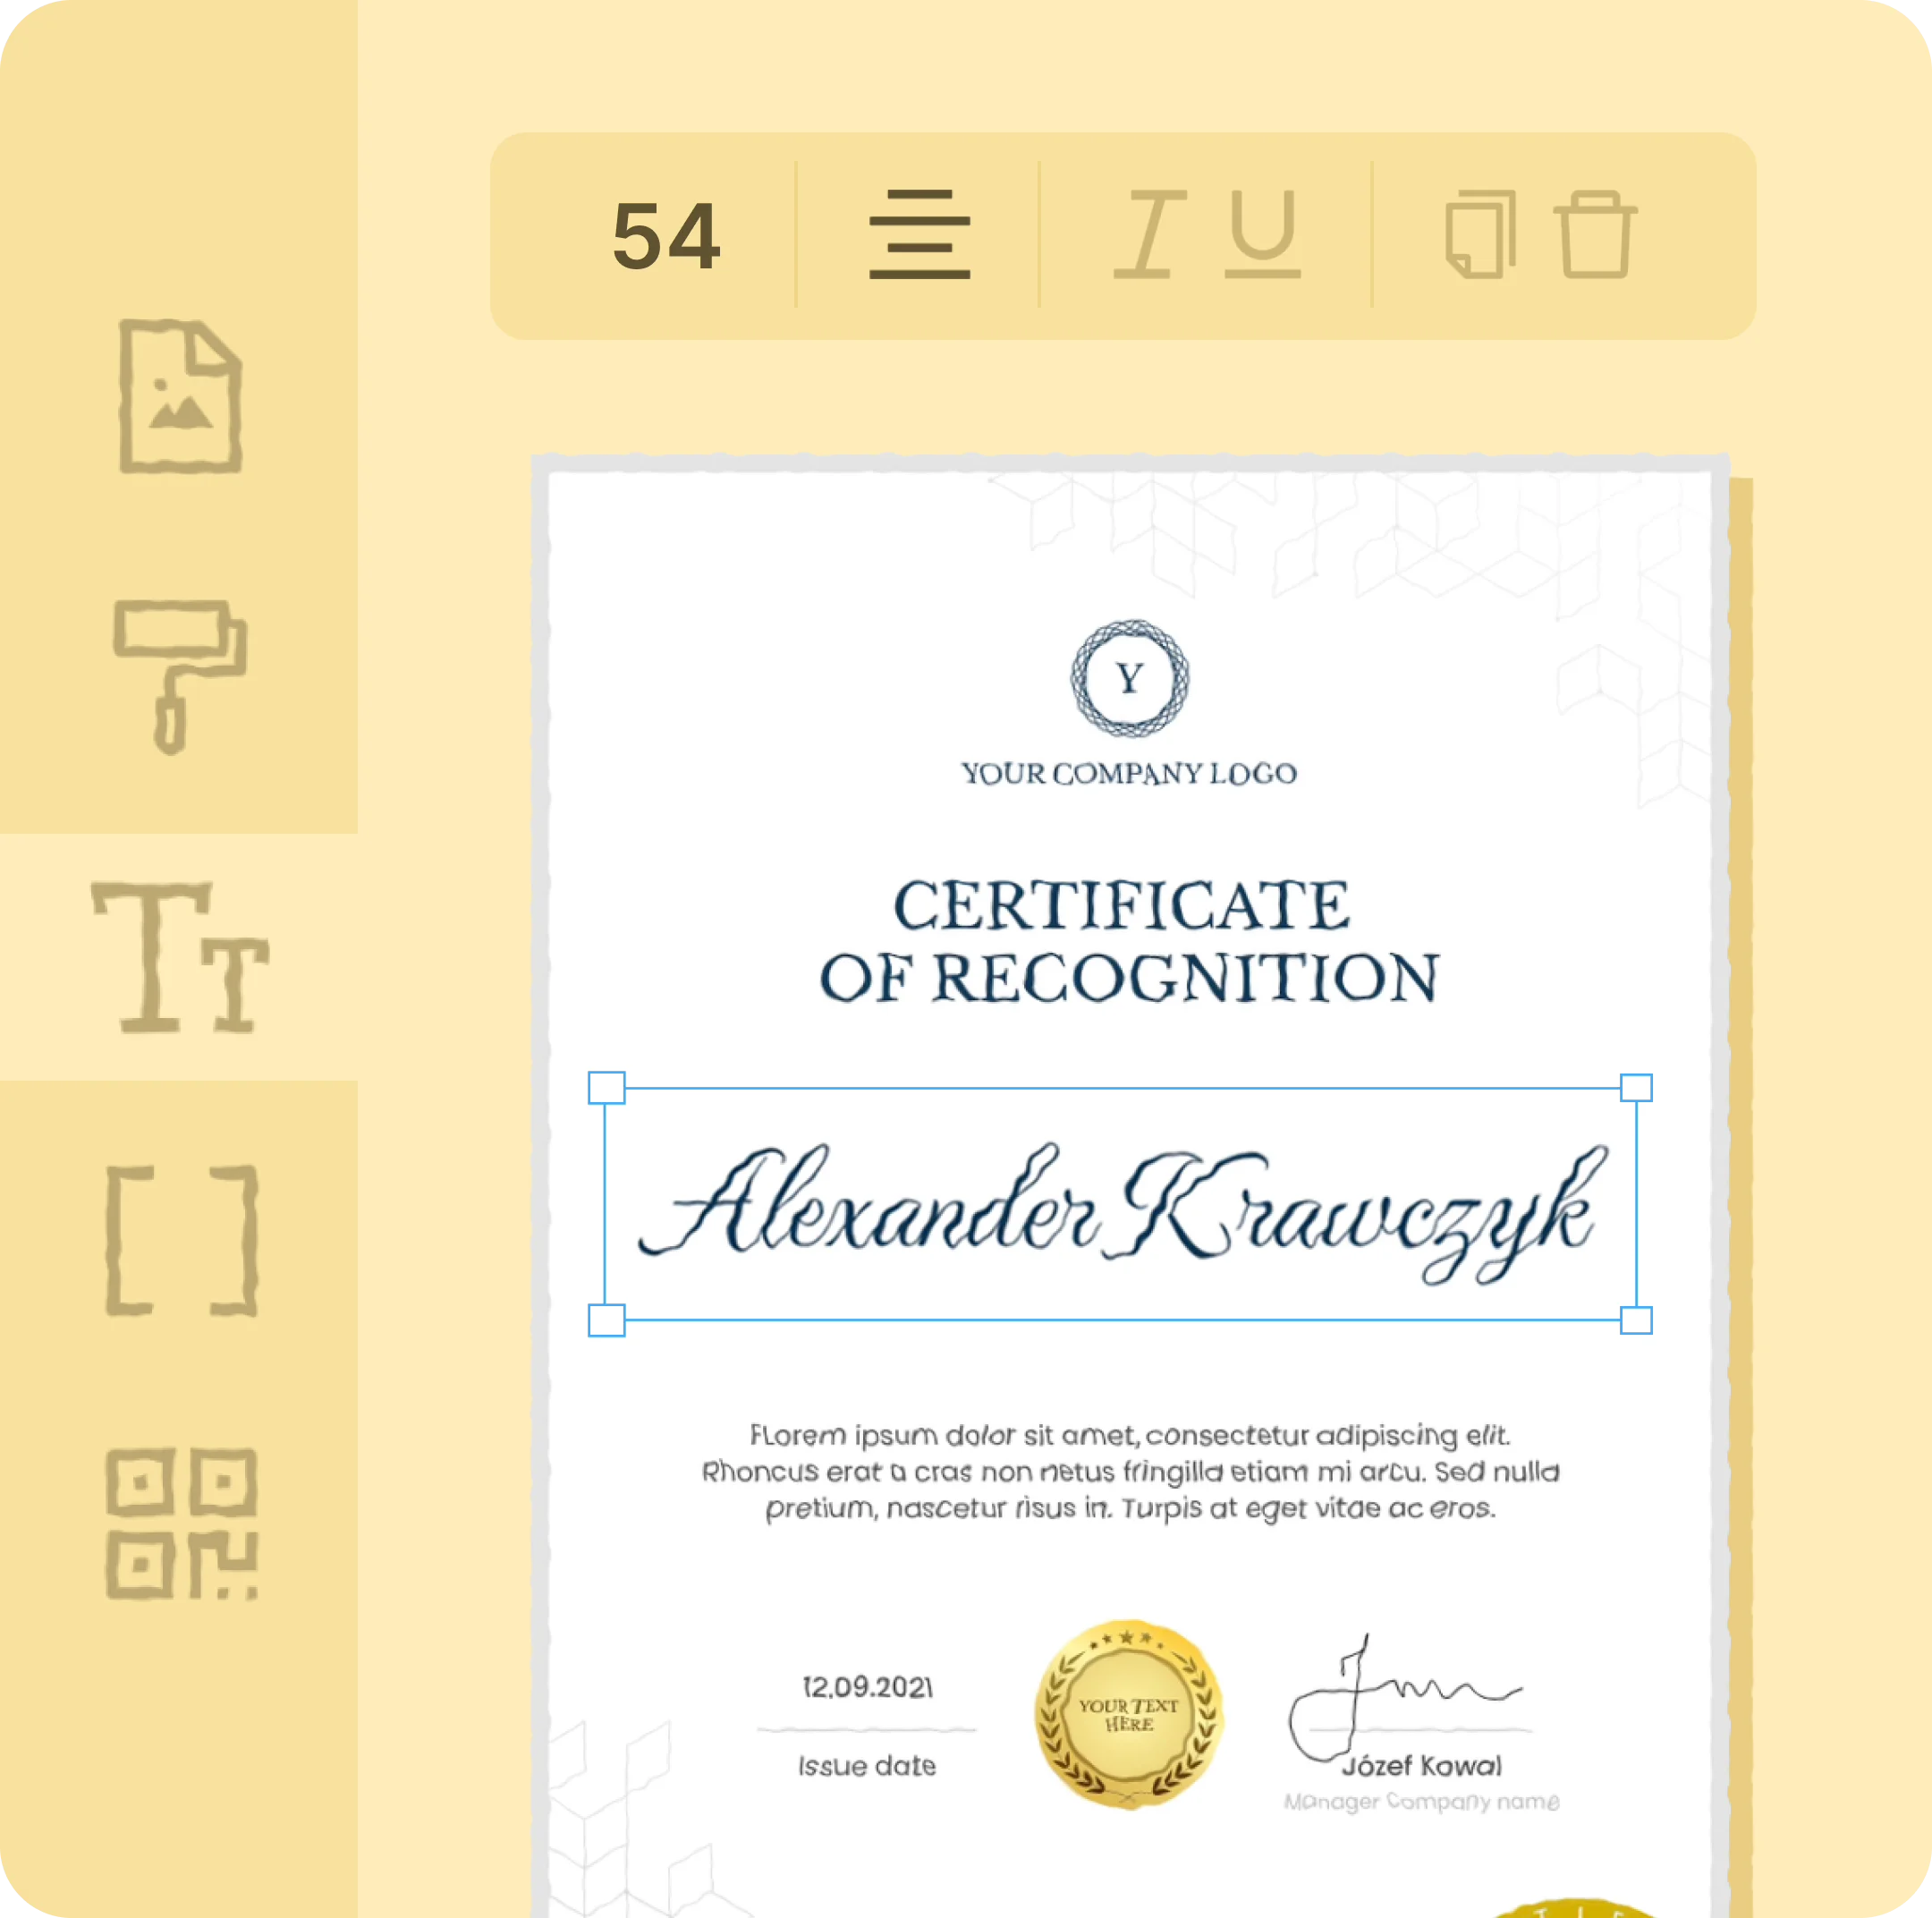 Create certificates in minutes with an intuitive design builder